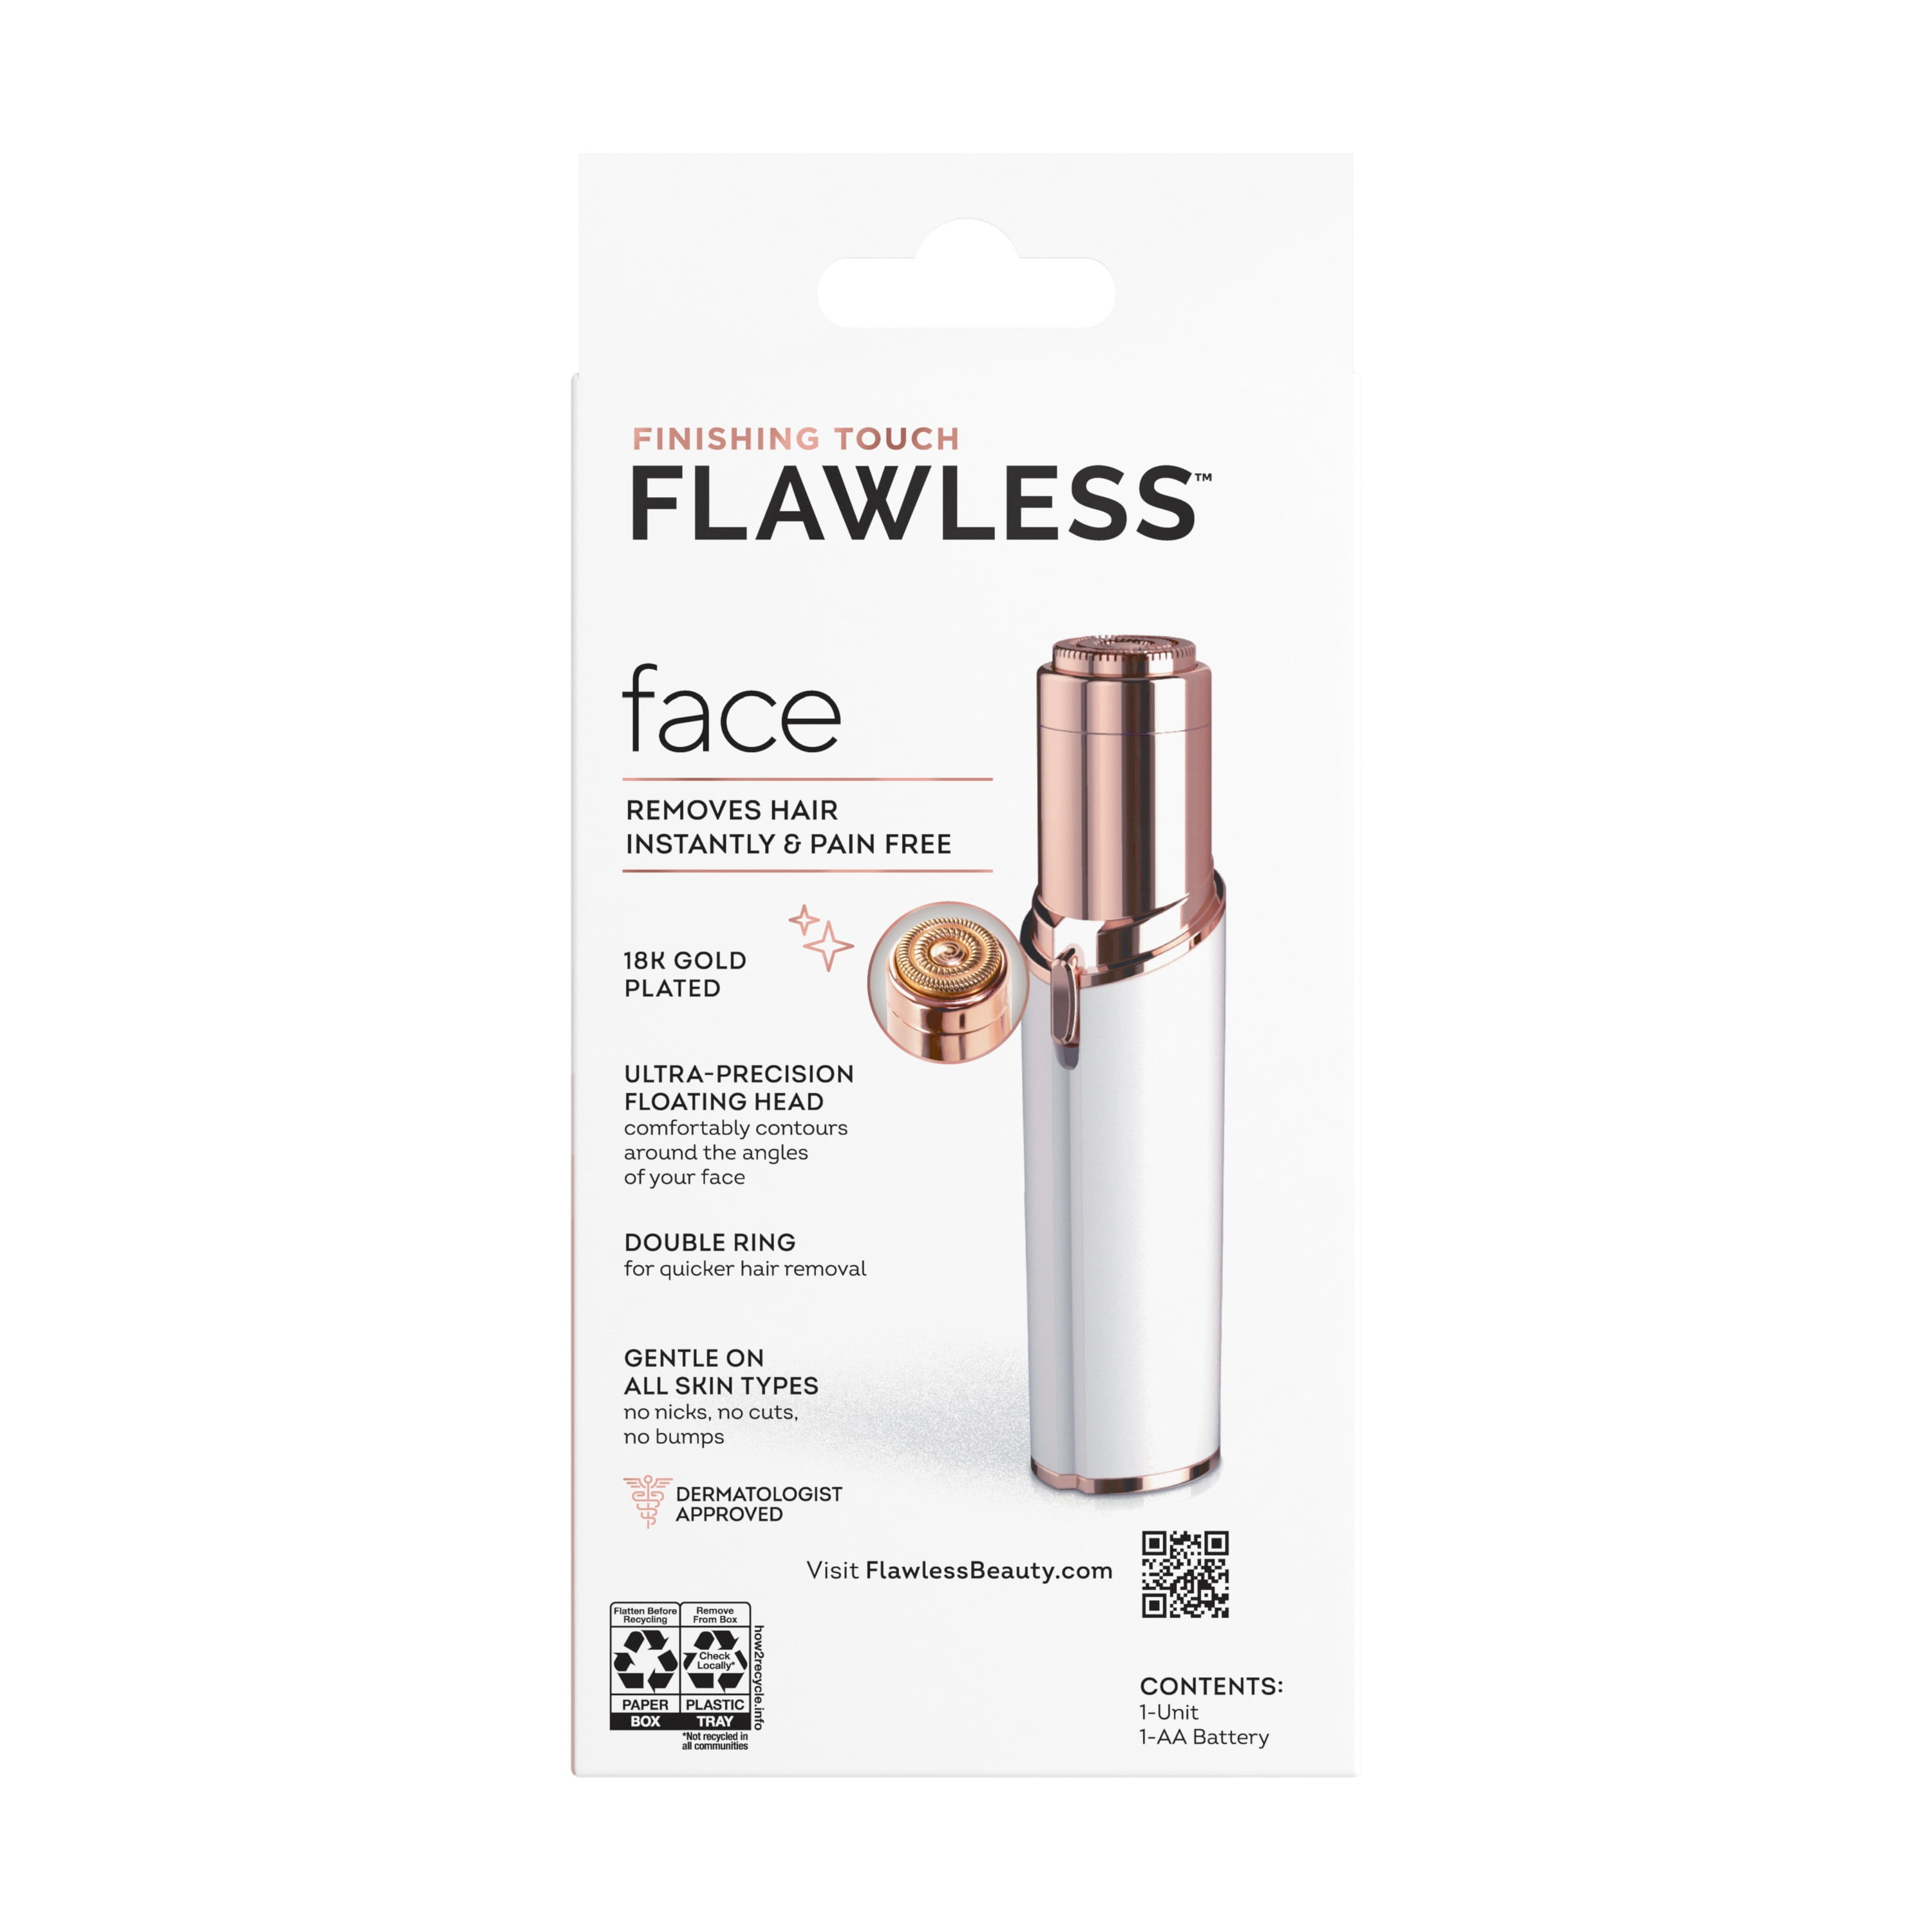 Finishing Touch Flawless Facial Hair Remover - Shop Electric